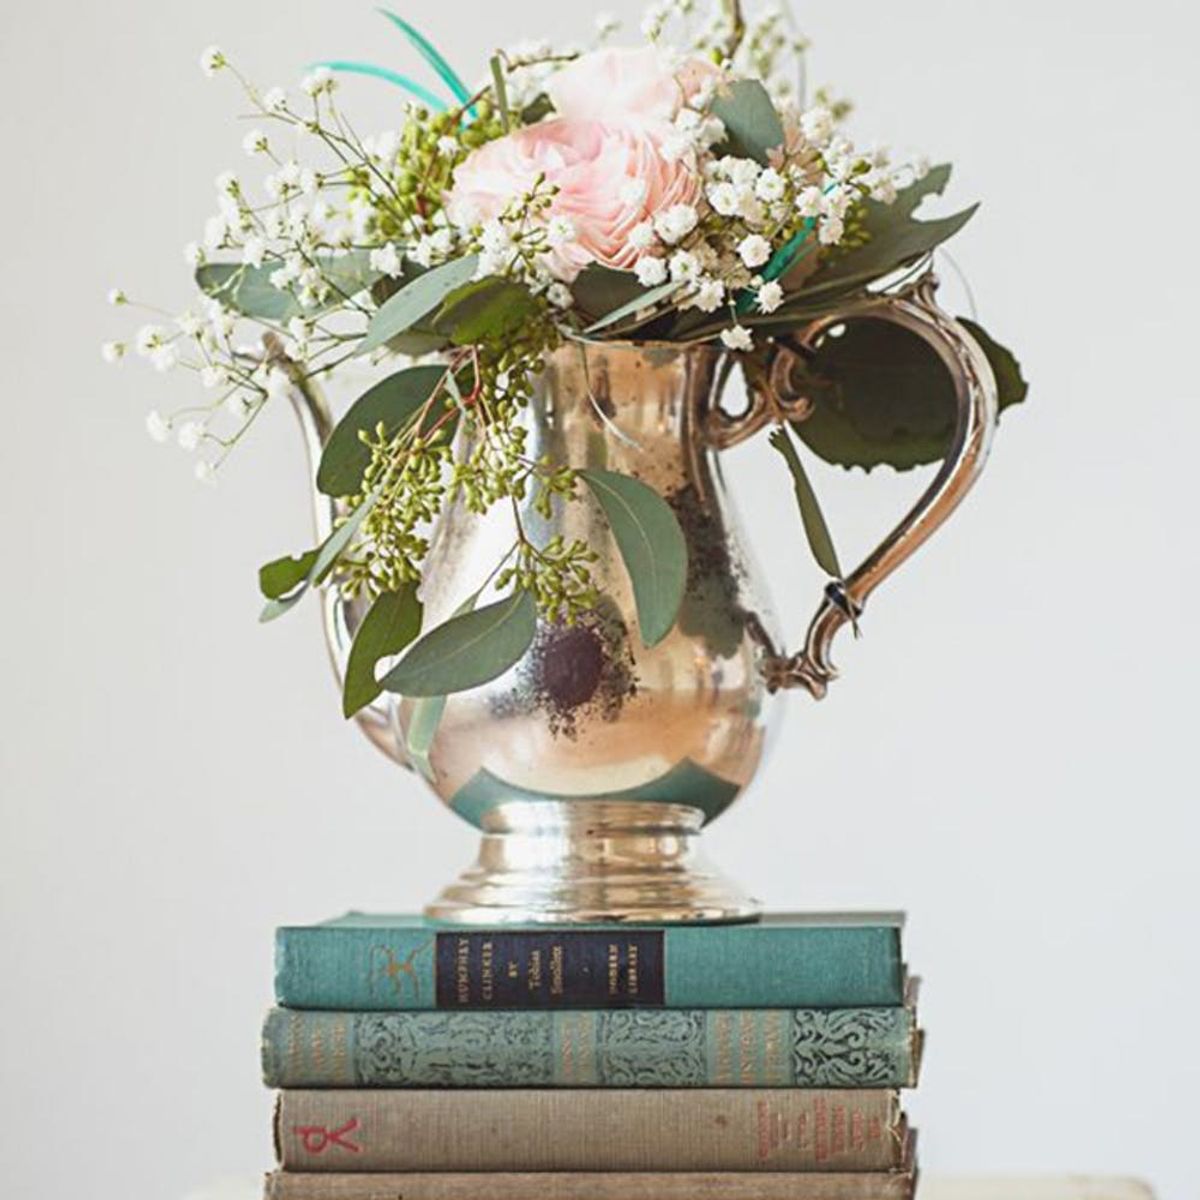 17 Chic Ways to Add Vintage Charm to Your Wedding